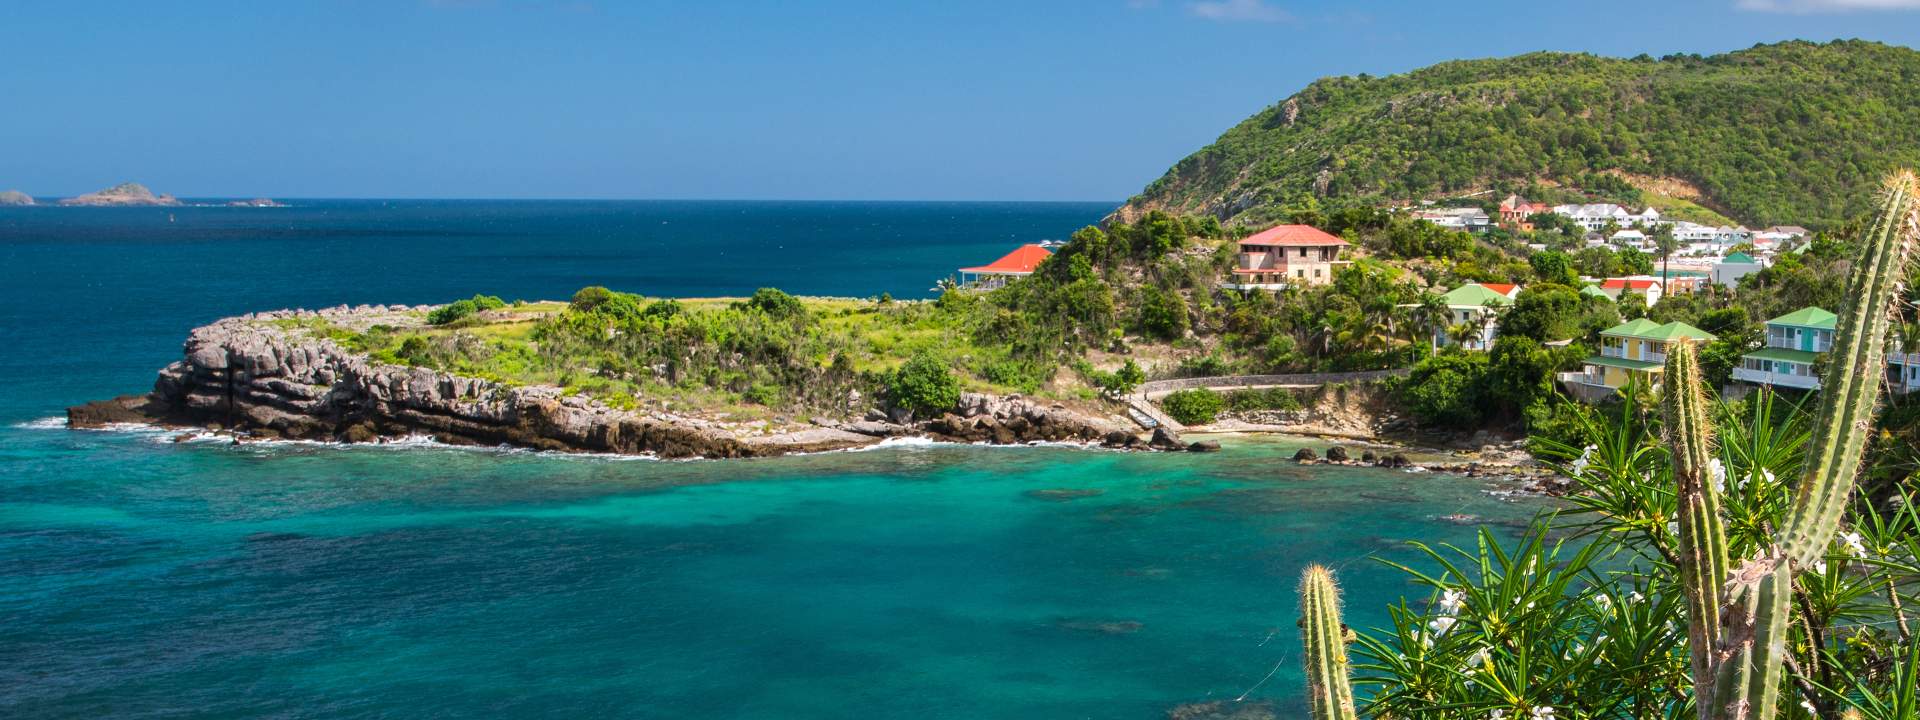 Explore Lesser Antilles & St. Barthelemy by boat